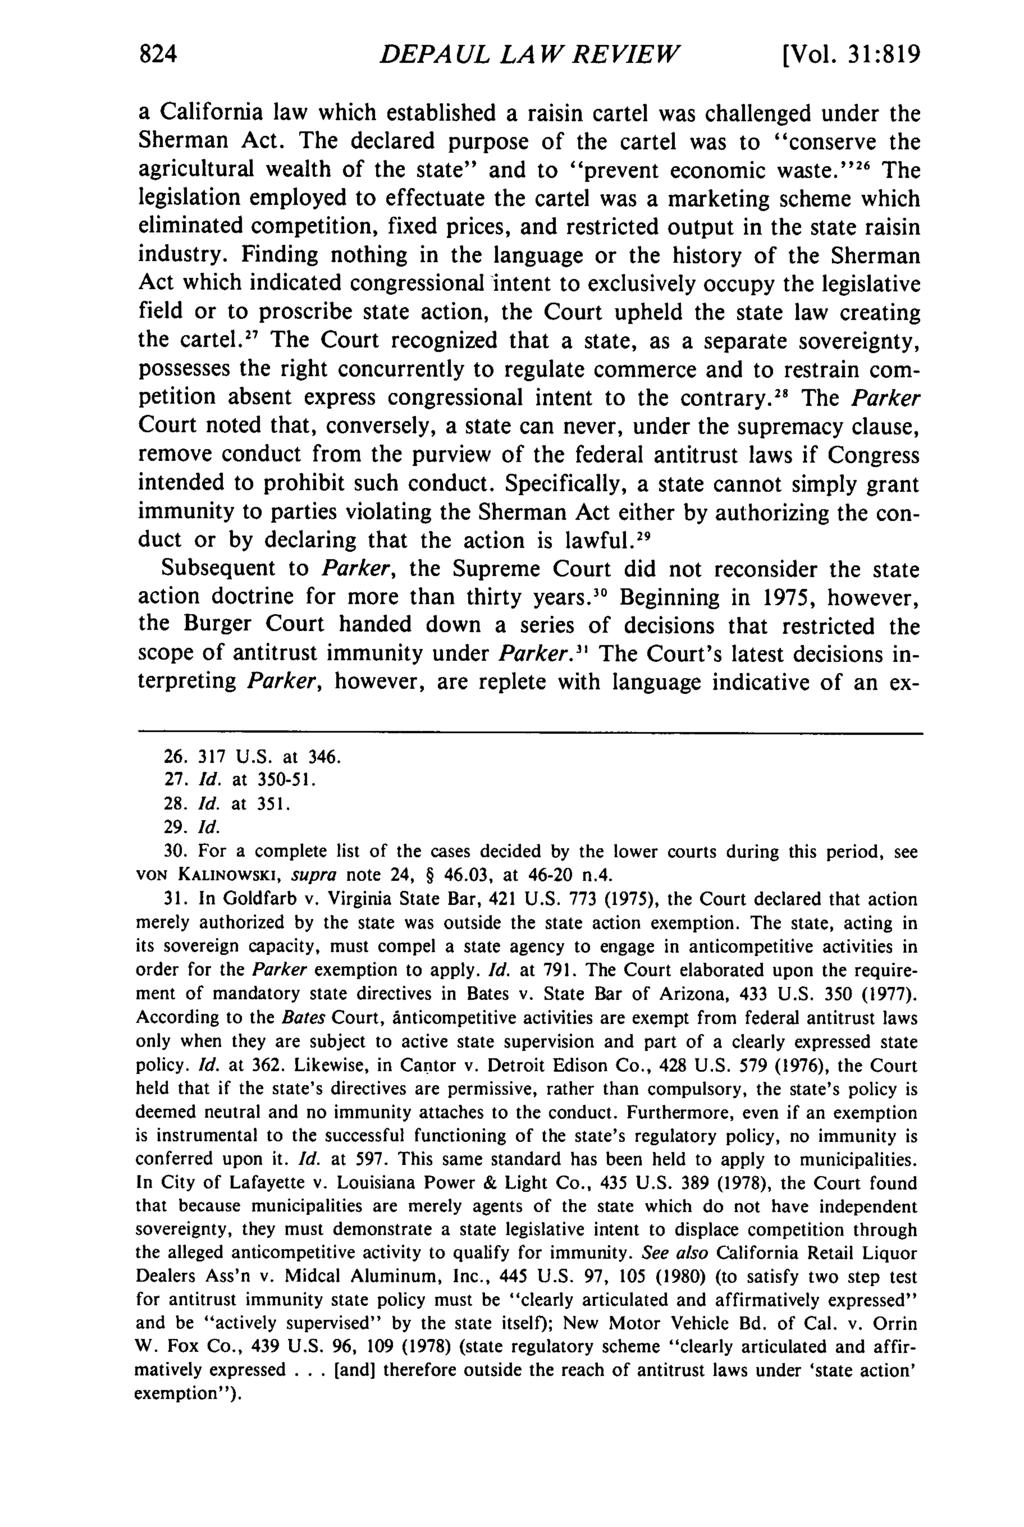 DEPA UL LA W REVIEW [Vol. 31:819 a California law which established a raisin cartel was challenged under the Sherman Act.